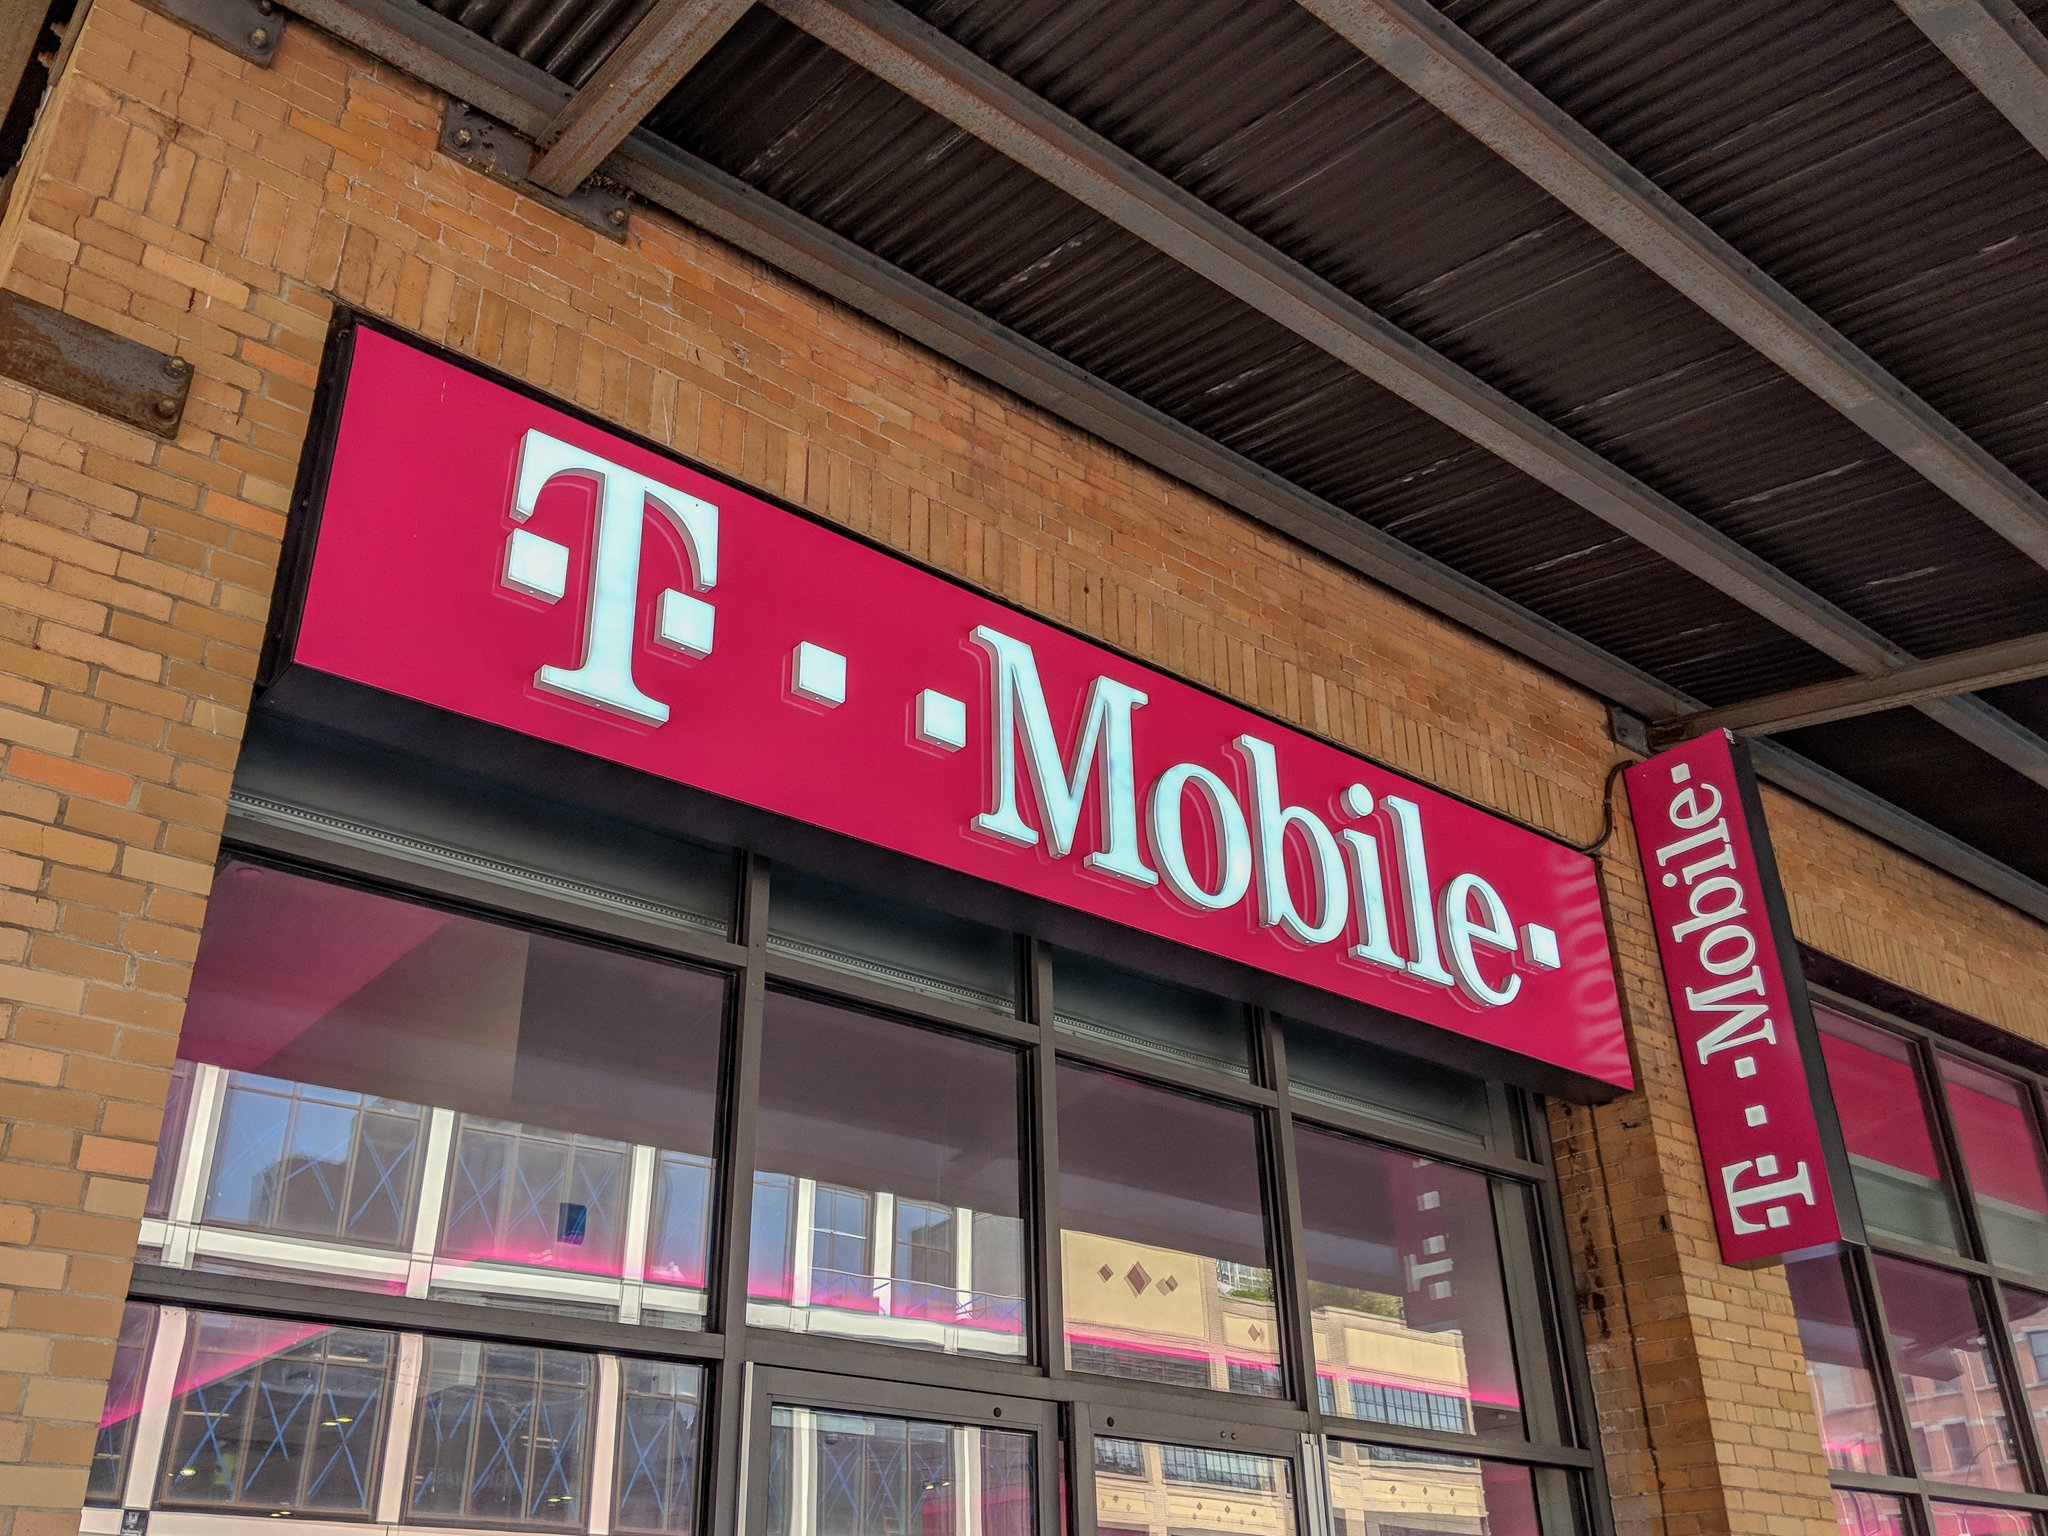 https://www.androidcentral.com/sites/androidcentral.com/files/styles/large_wm_brw/public/article_images/2018/06/t-mobile-store-nyc-2018.jpg?itok=qoKMh6uz